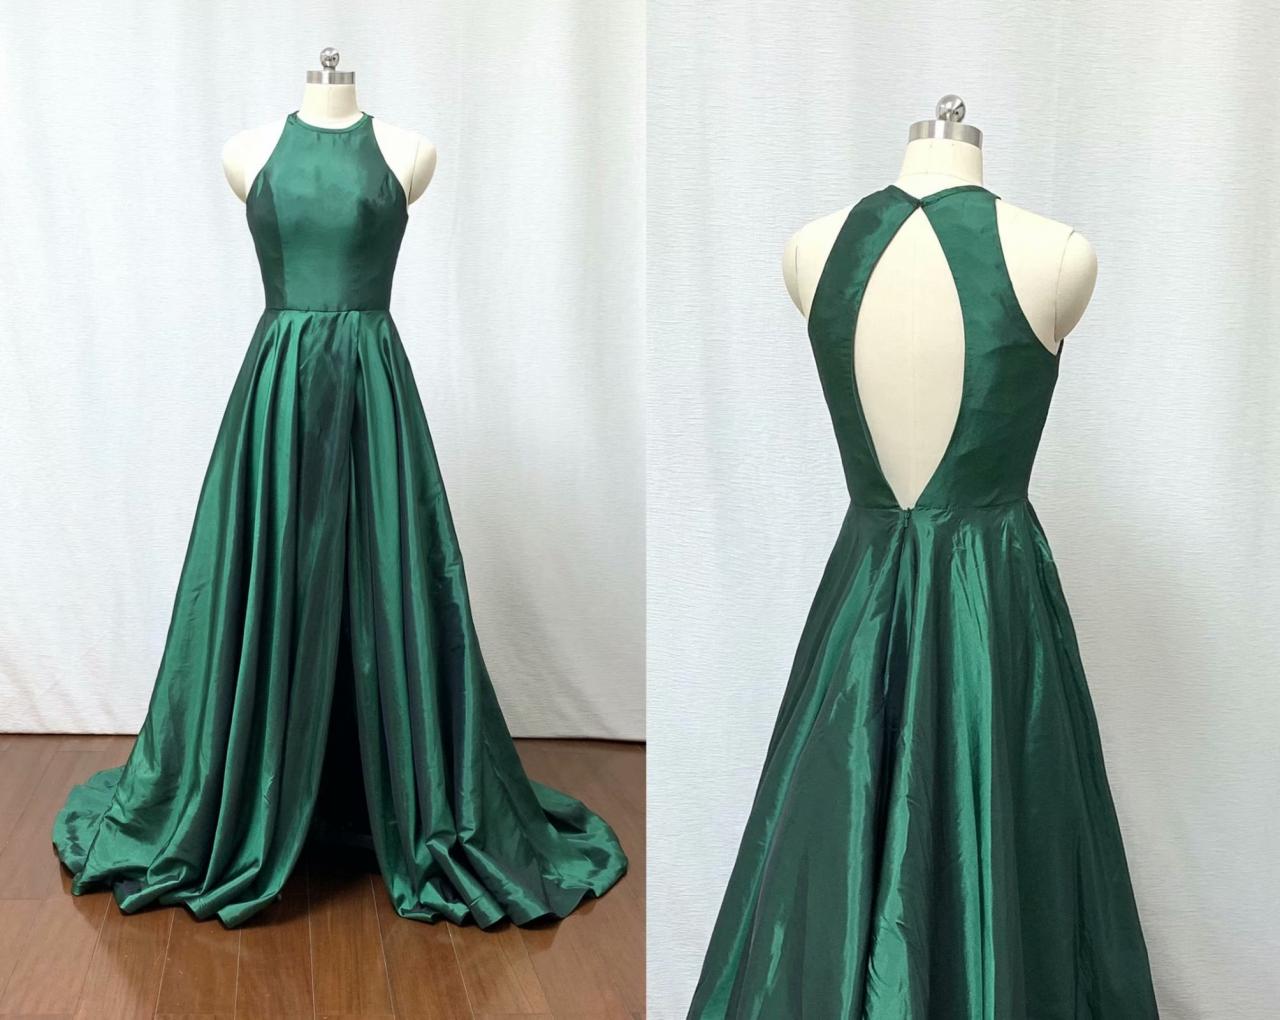 2019 Dark Green Backless Evening Dresses A Line Chapel Train Prom Gowns